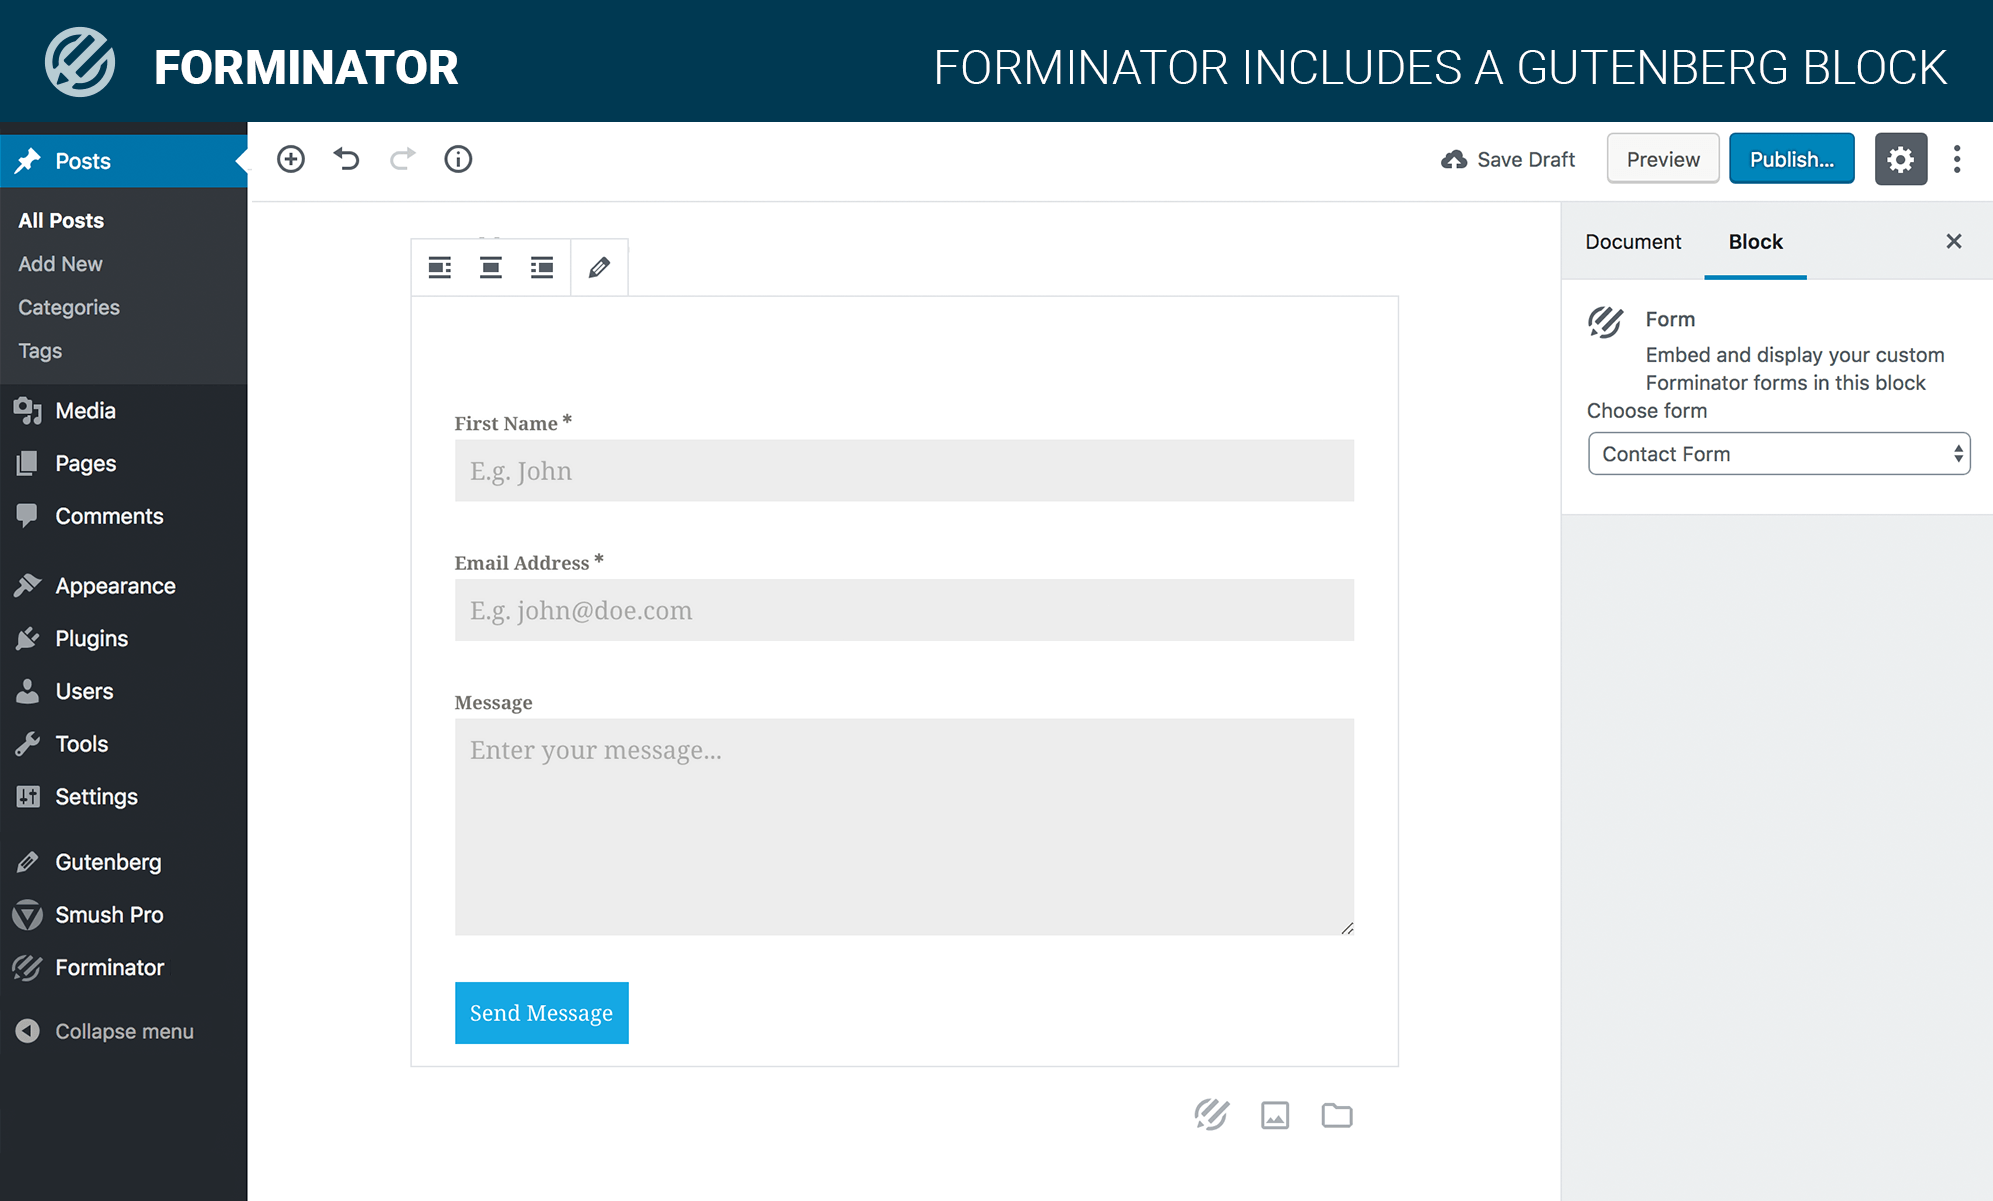 Forminator includes its own Gutenberg block.